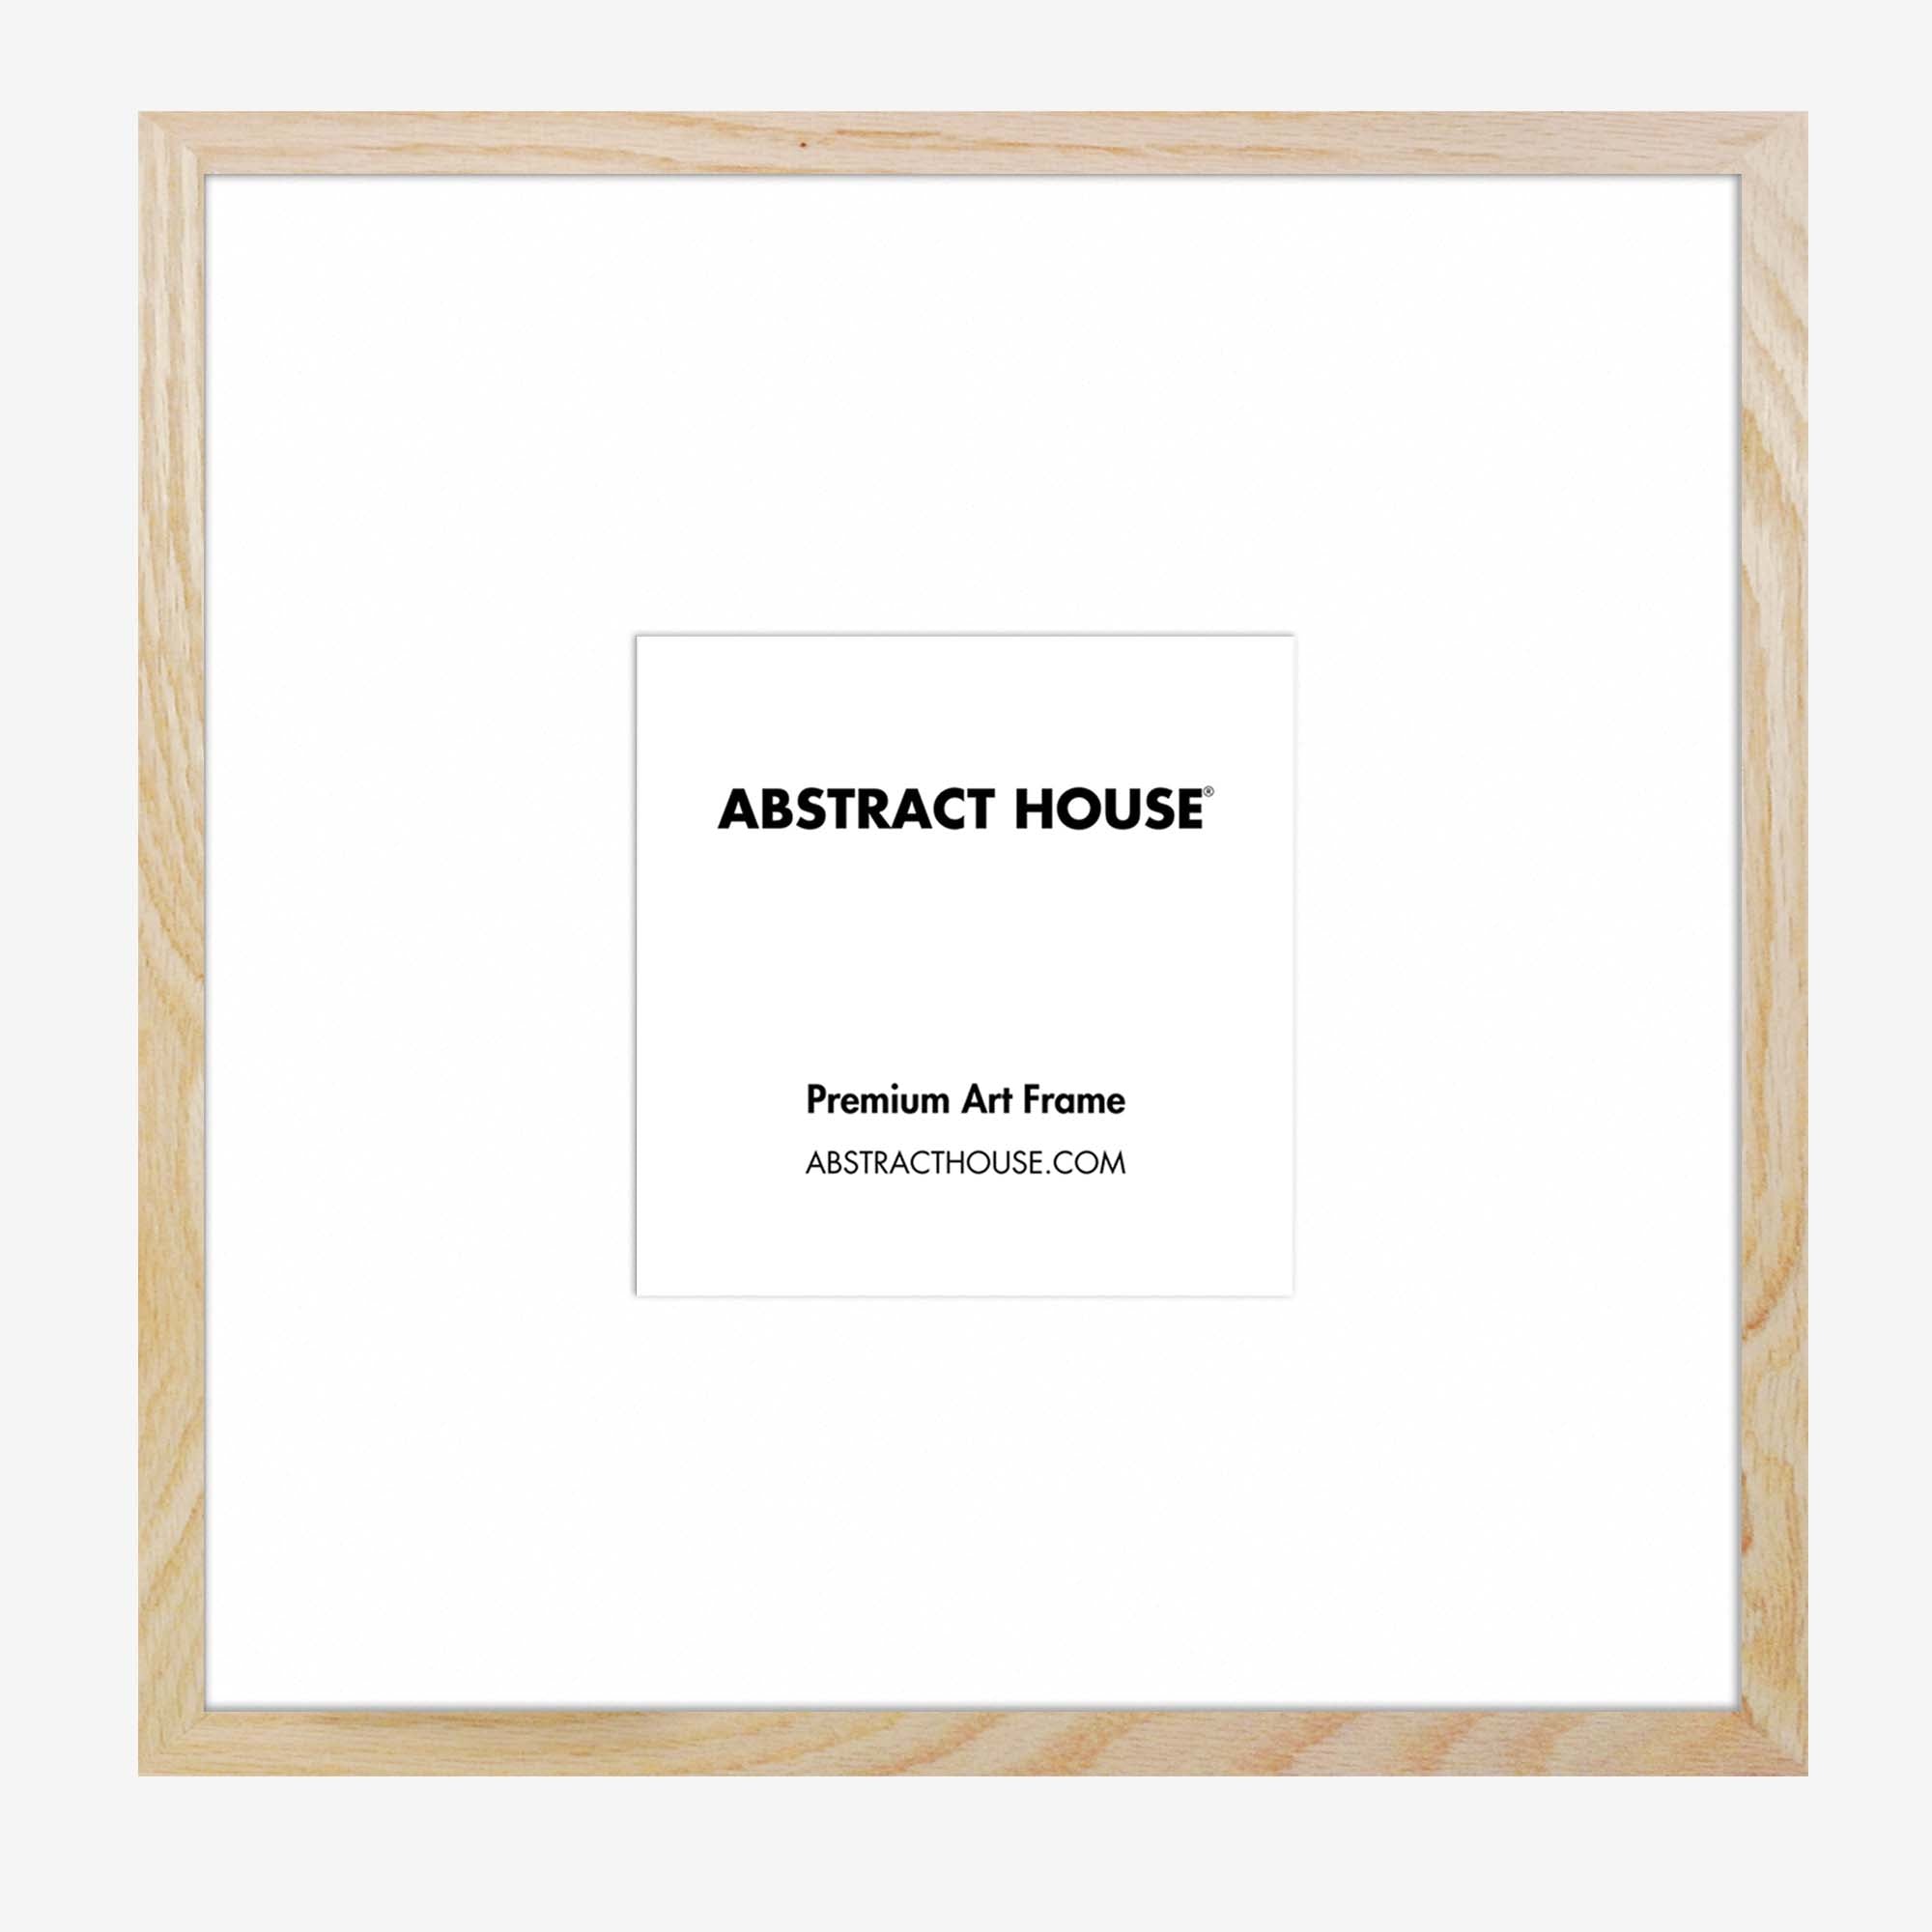 50x50 cm Wooden Frame-Oak-20 x 20 cm / 7.9 x 7.9 Inches-Abstract House